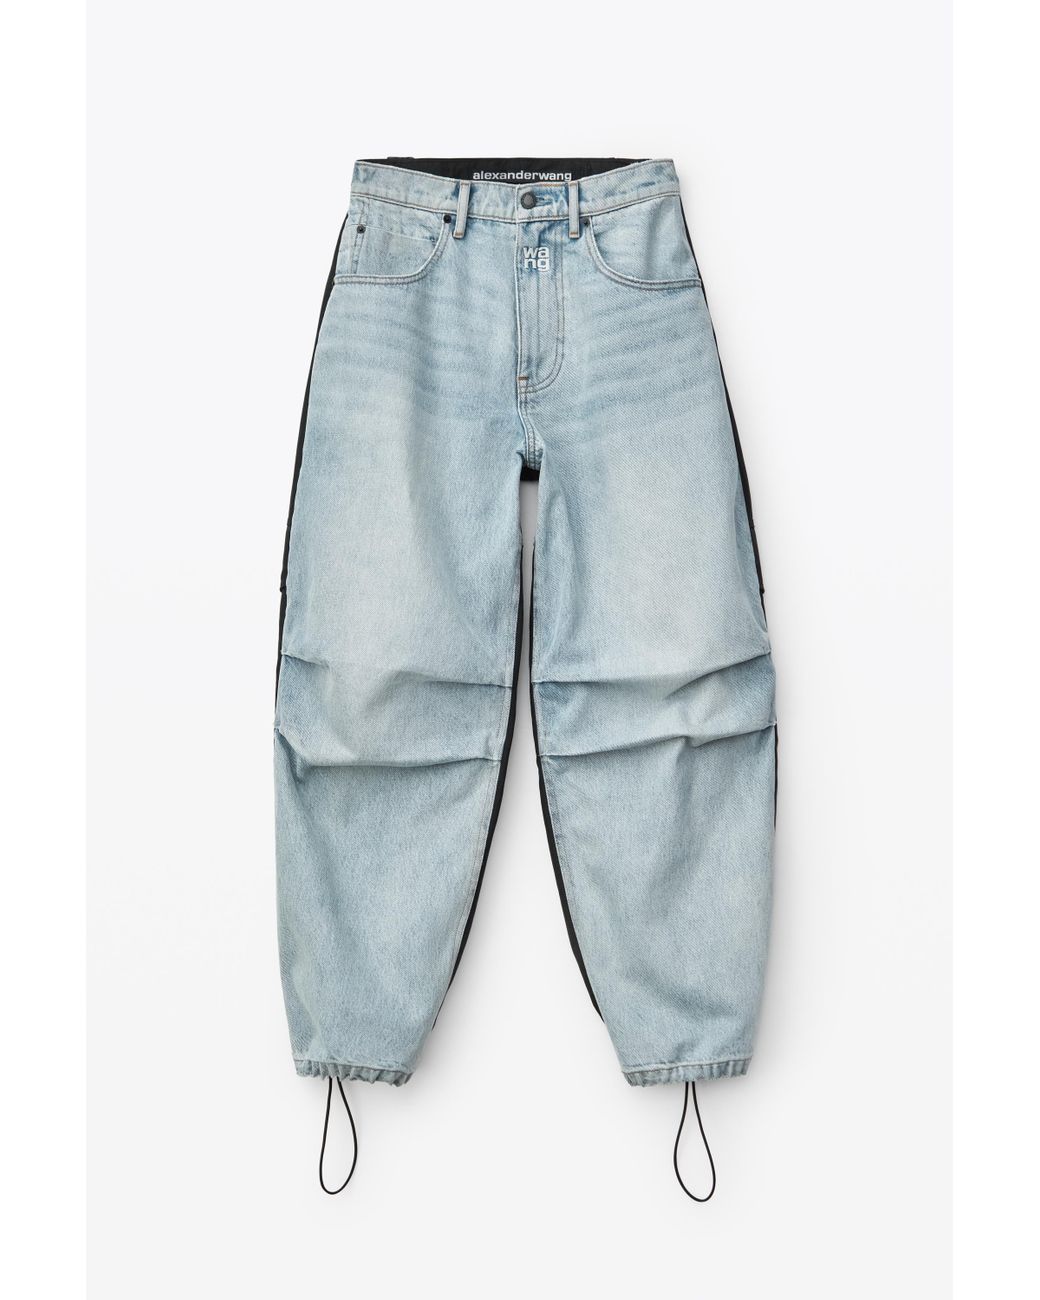 Alexander Wang Wave Cuff Wide Jeans | Woman Jeans Blue 27 | MILANSTYLE.COM